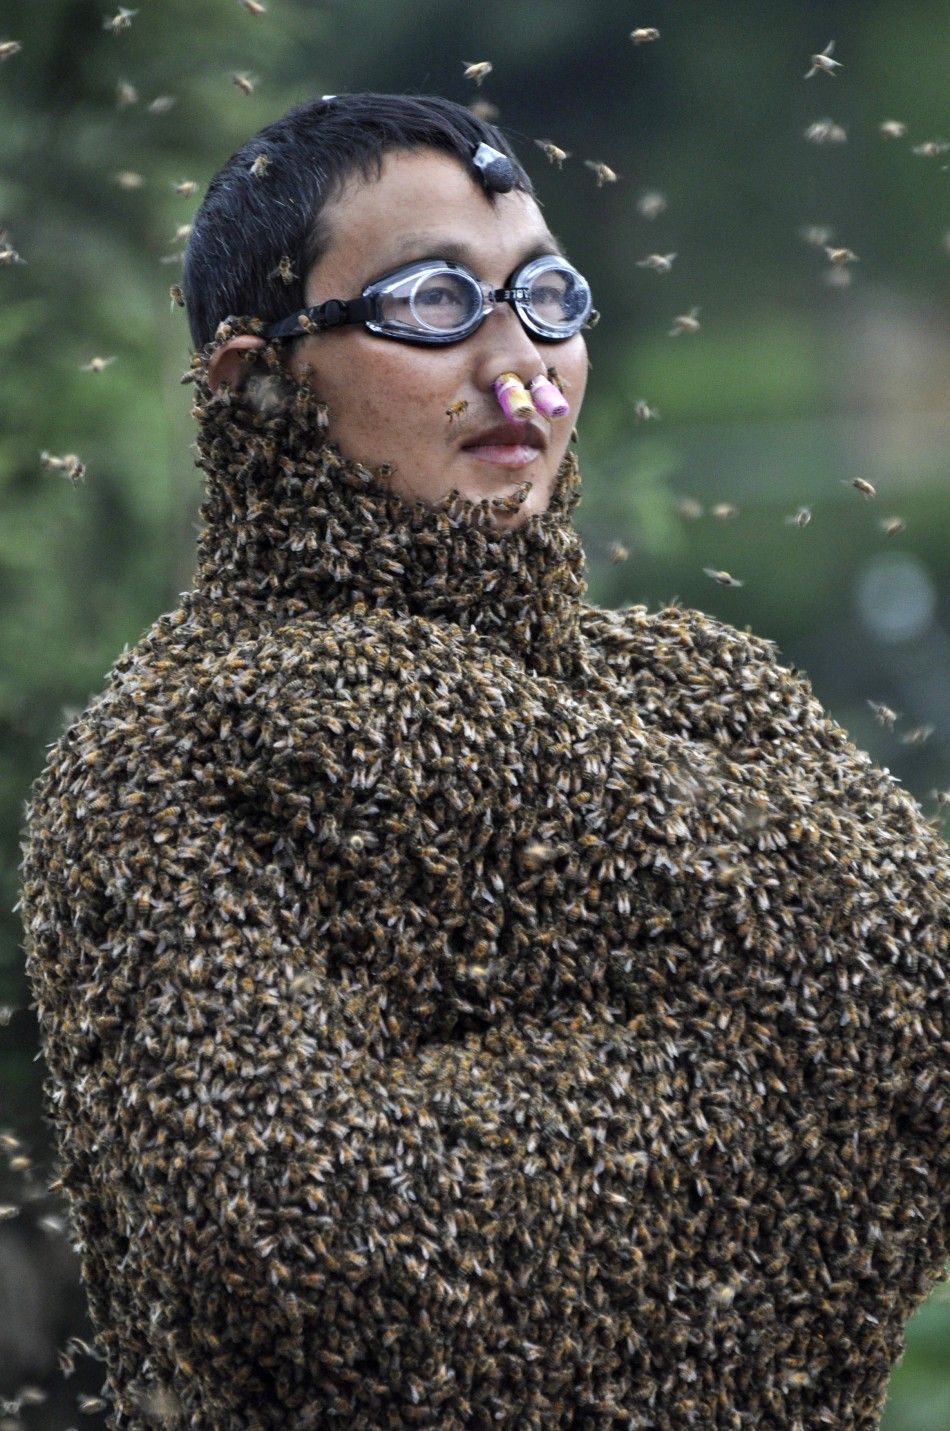 Bizarre Images of Chinese Farmers Covered With Thousands of Killer Bees.